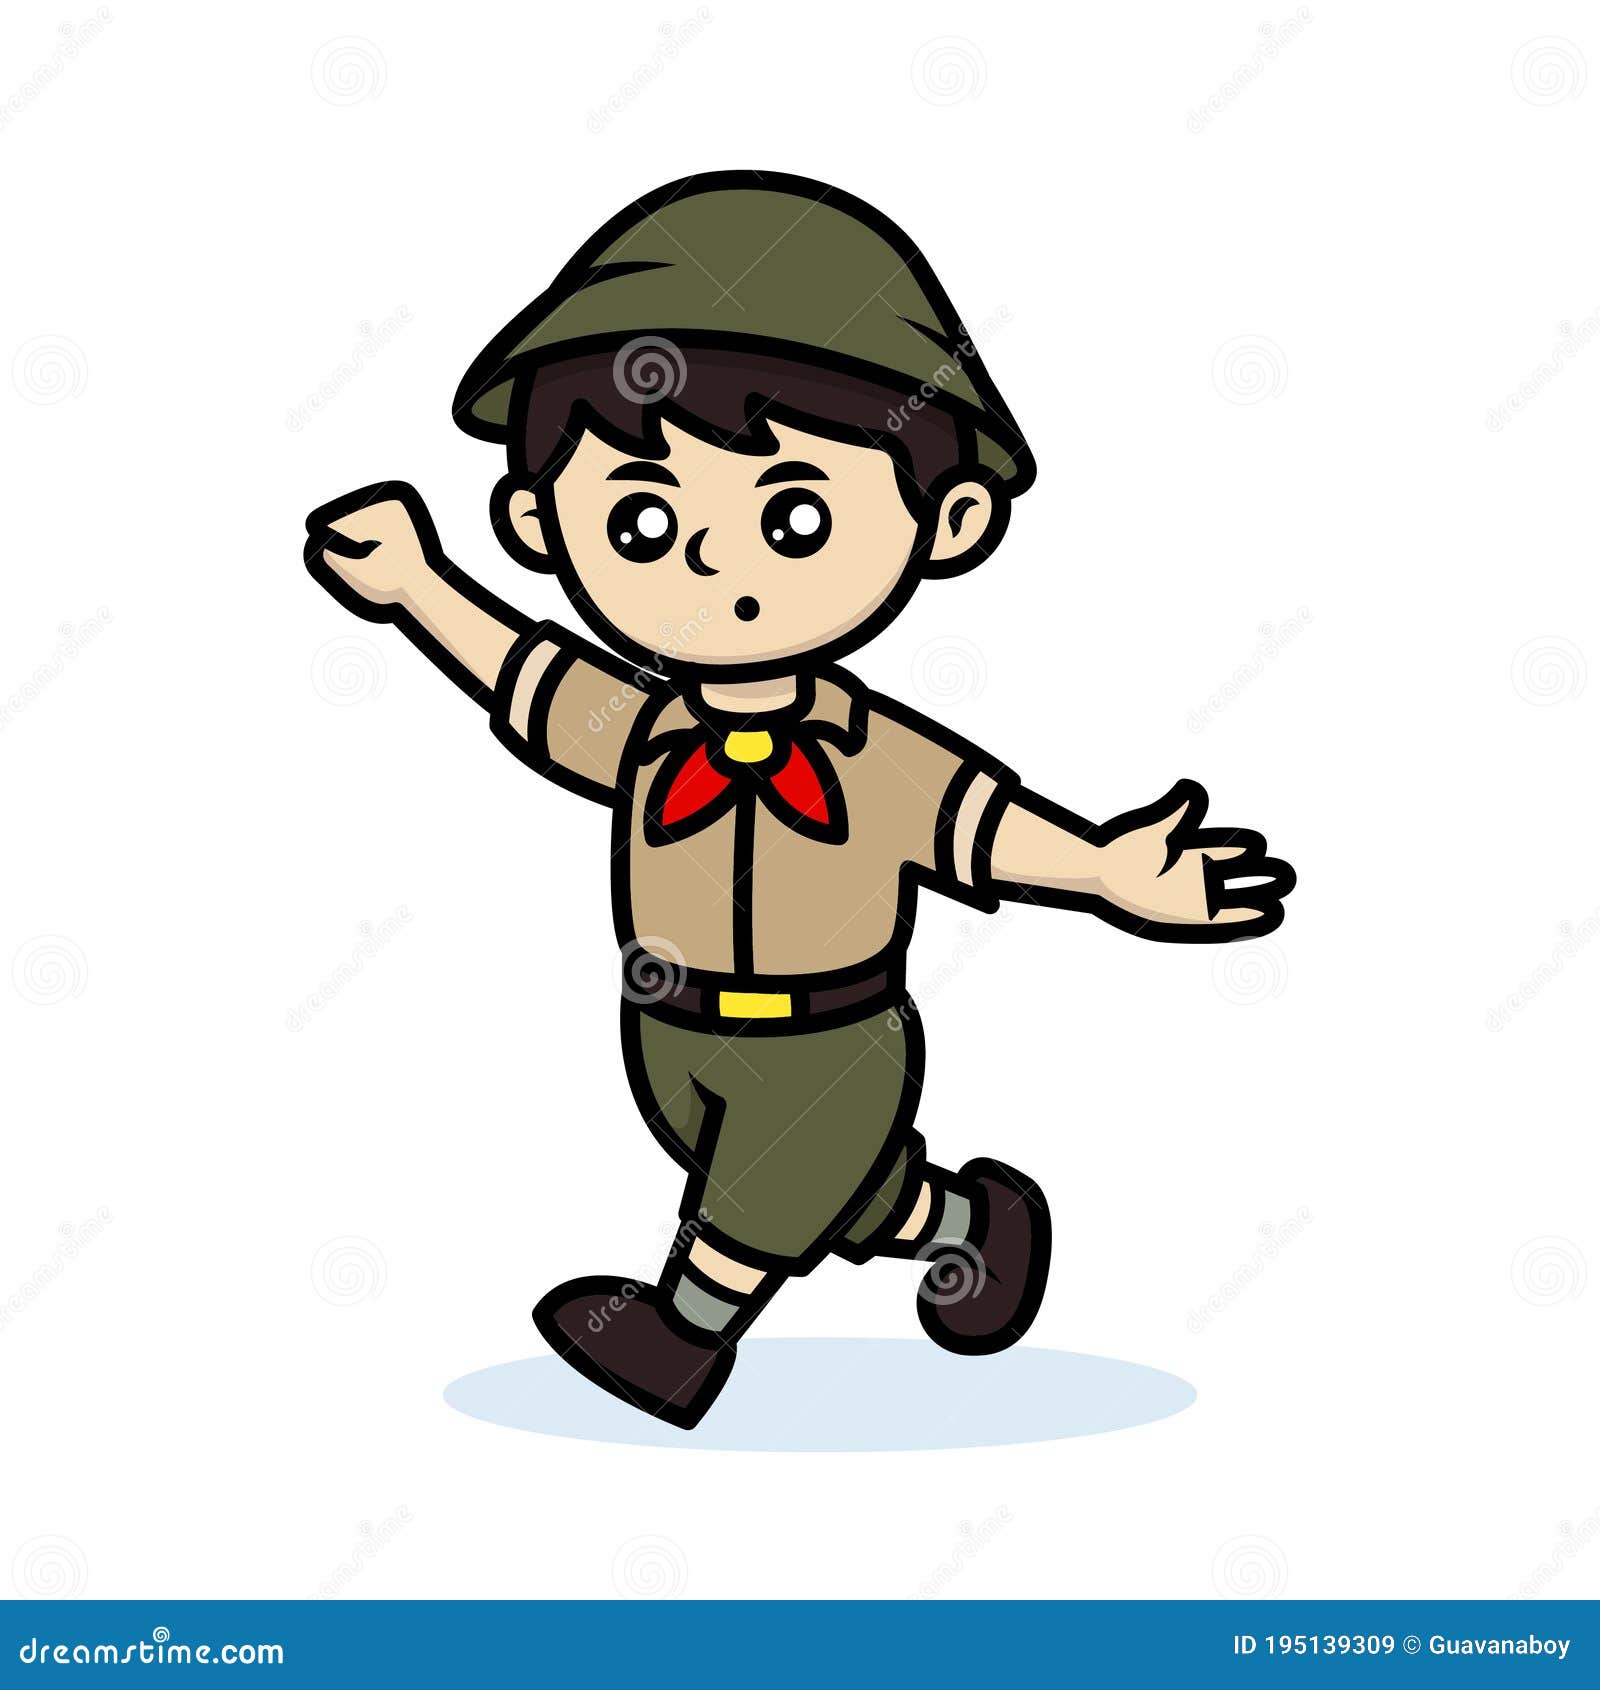 Cute and Simple Boy Scout Kids Mascot Logo Design Illustration Stock Vector  - Illustration of friends, american: 195139309